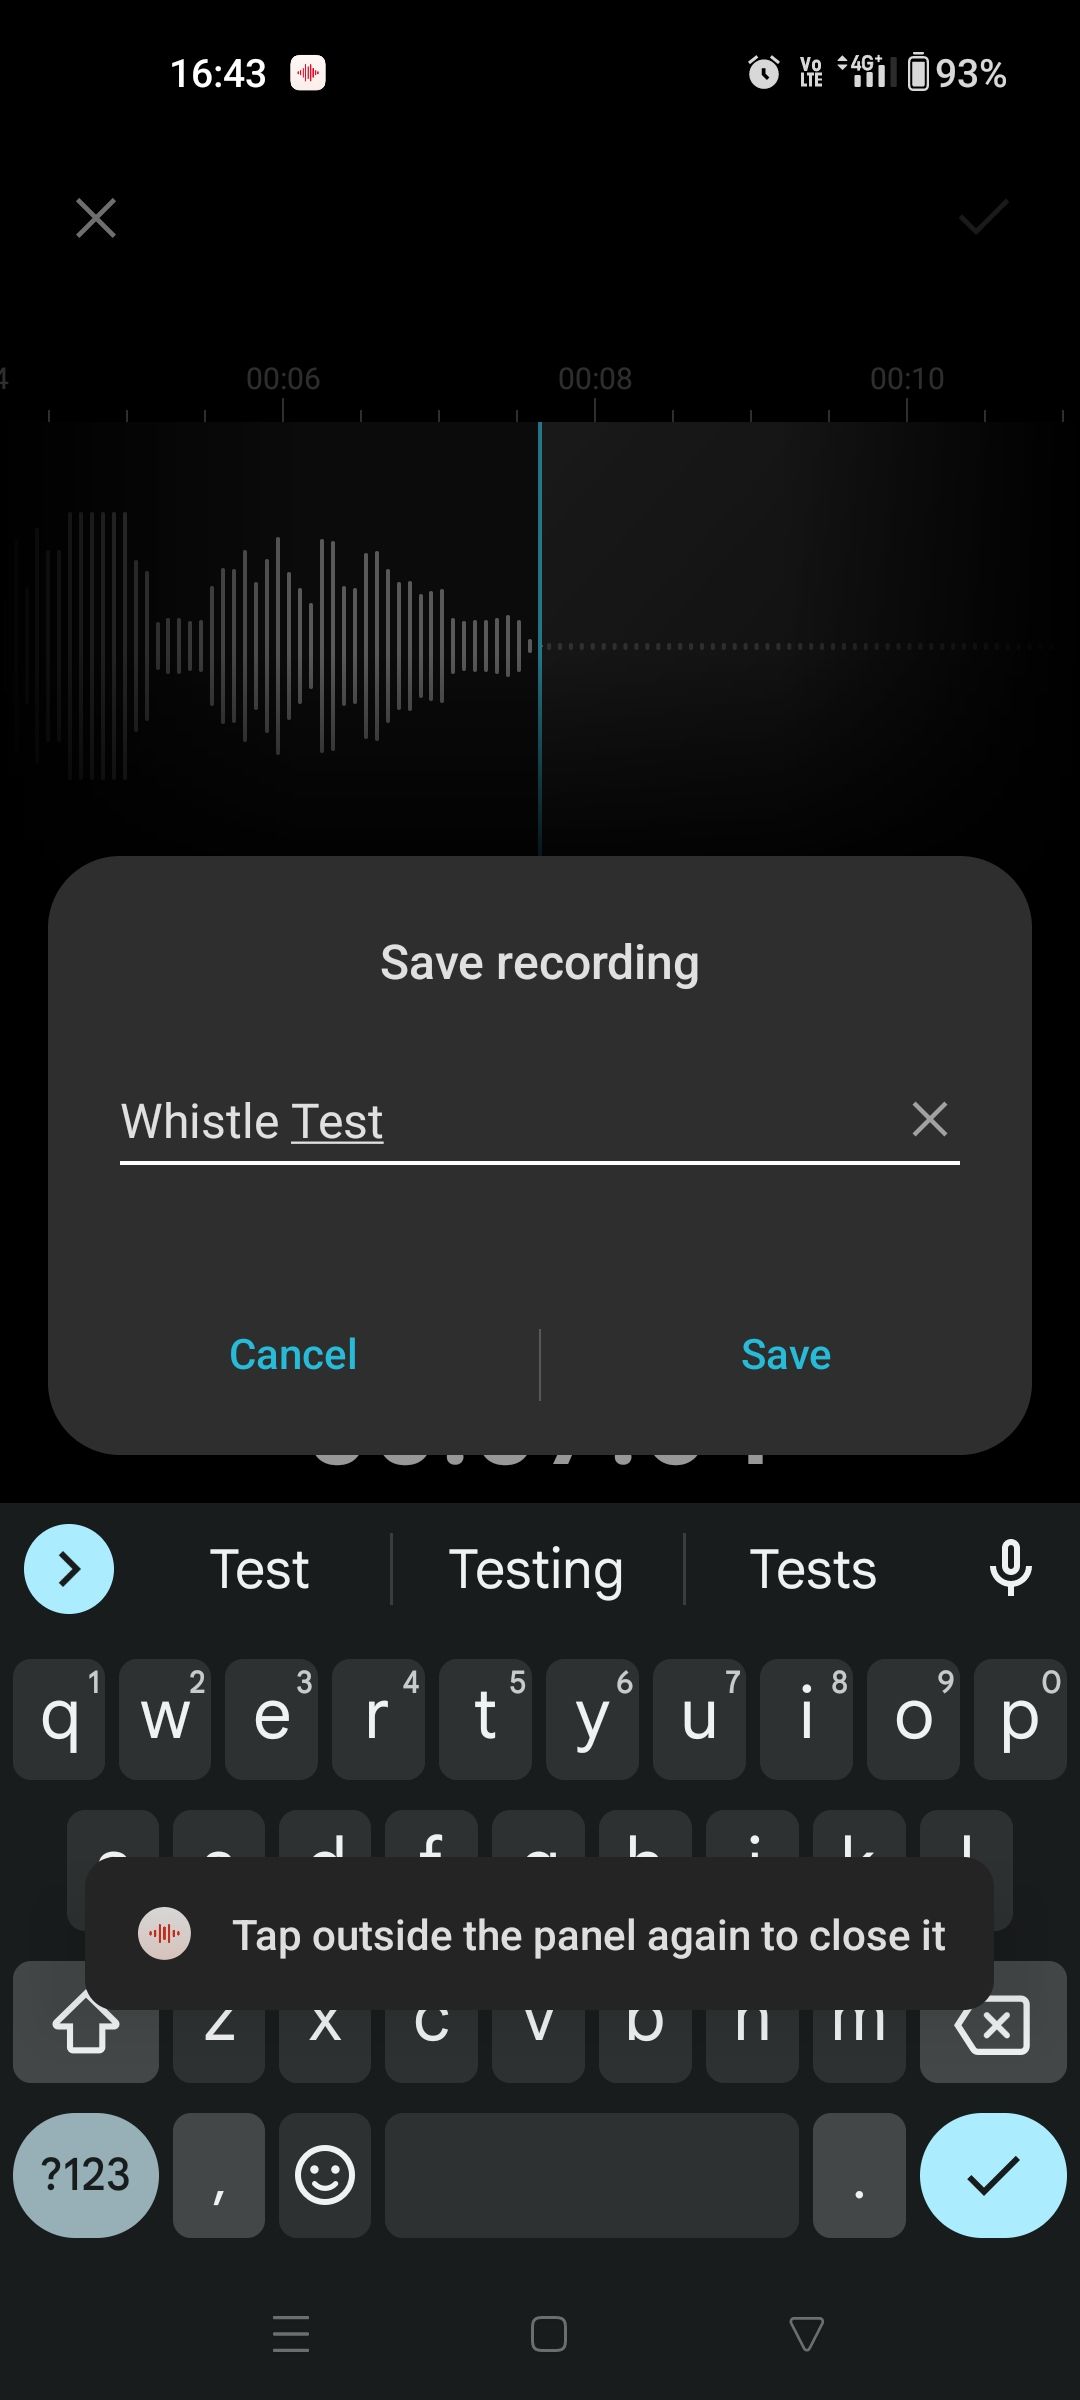 Name Your Recording in Recorder App